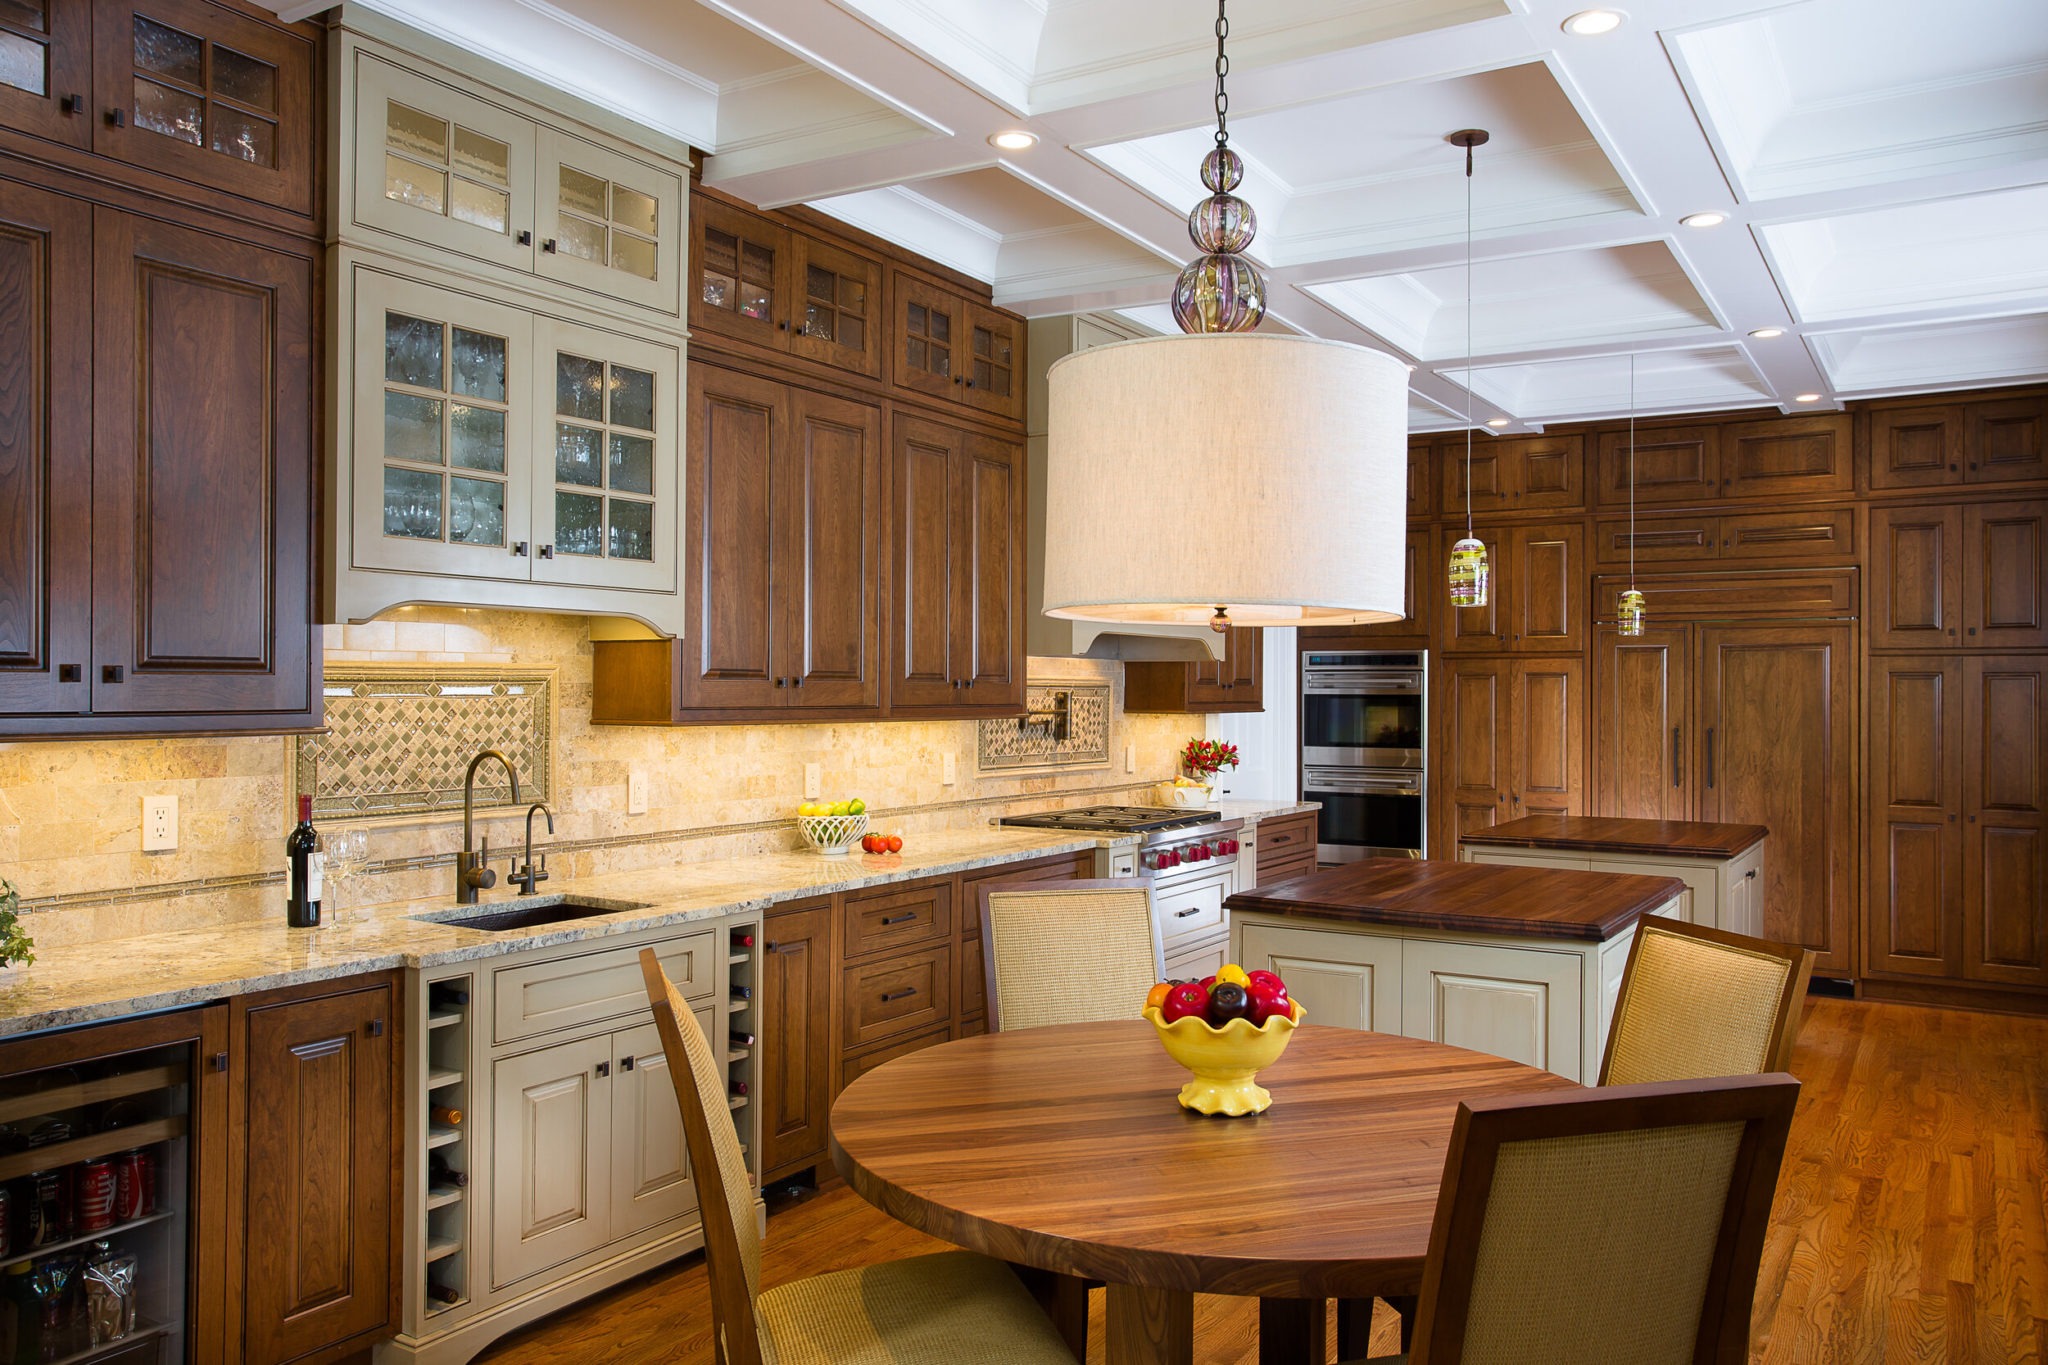 SawHorse provides the Top Kitchen and Bath Features for Atlanta homes